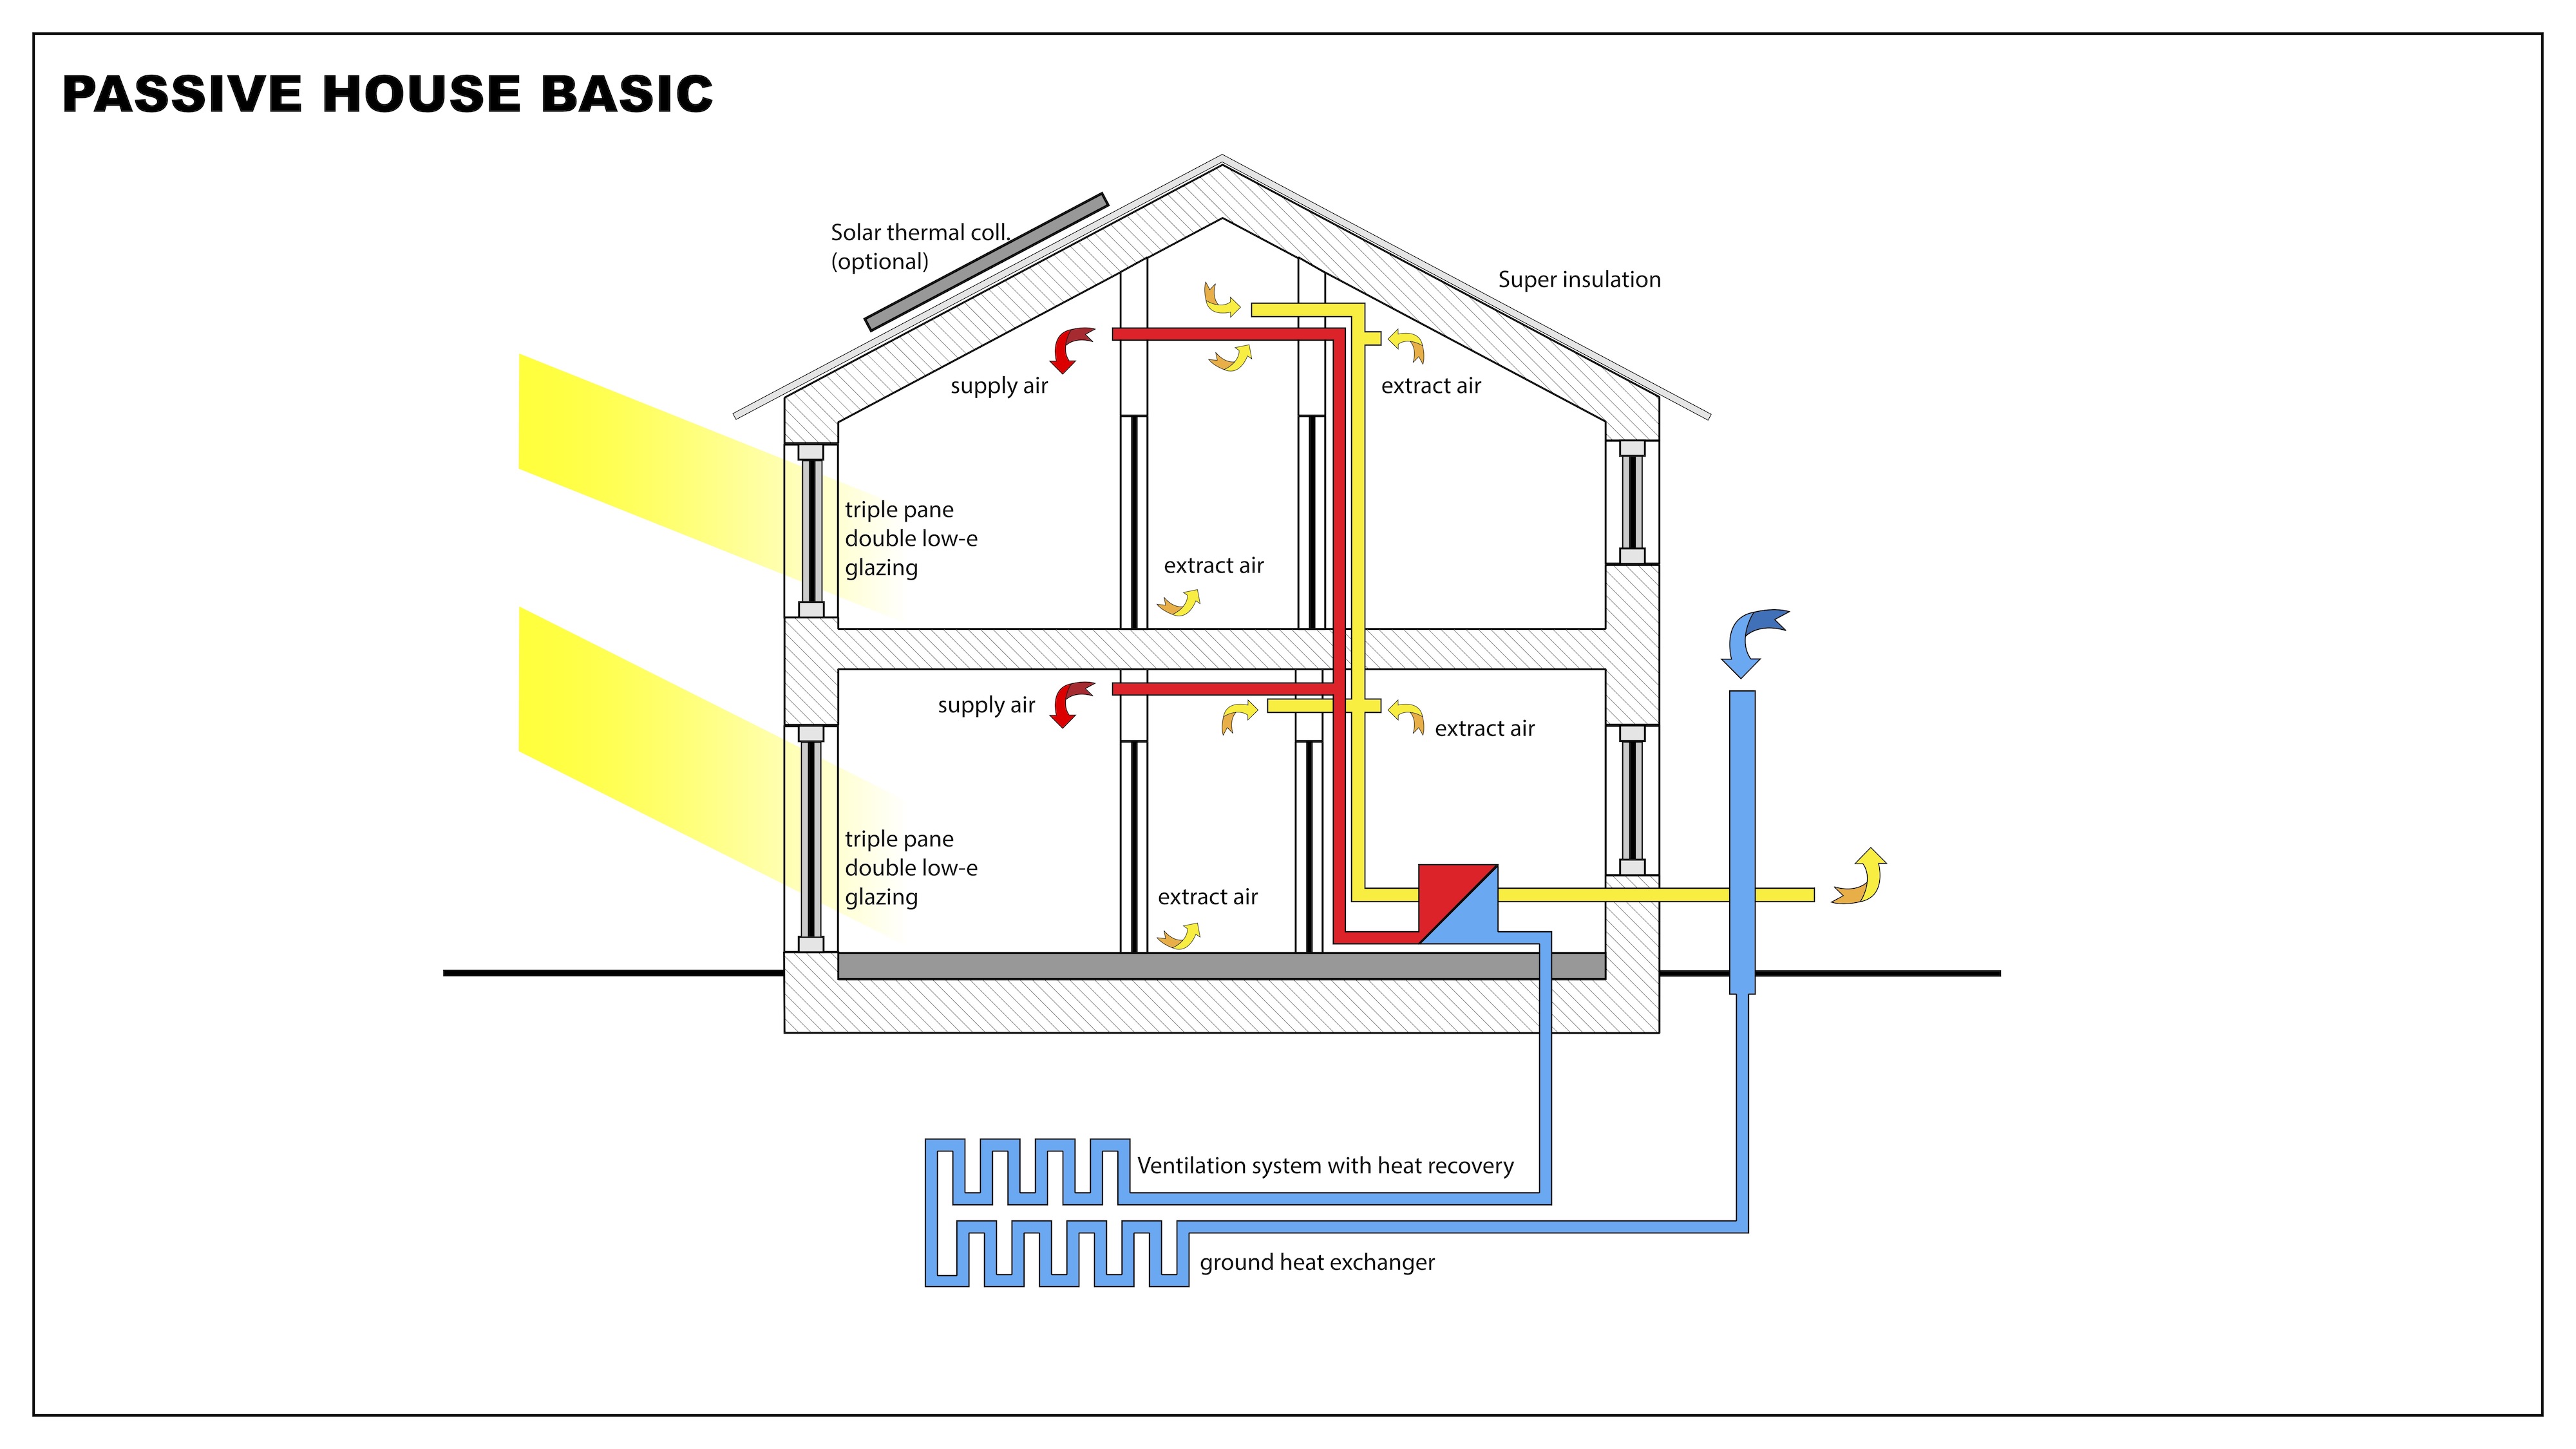 Illustration of a Passive House build